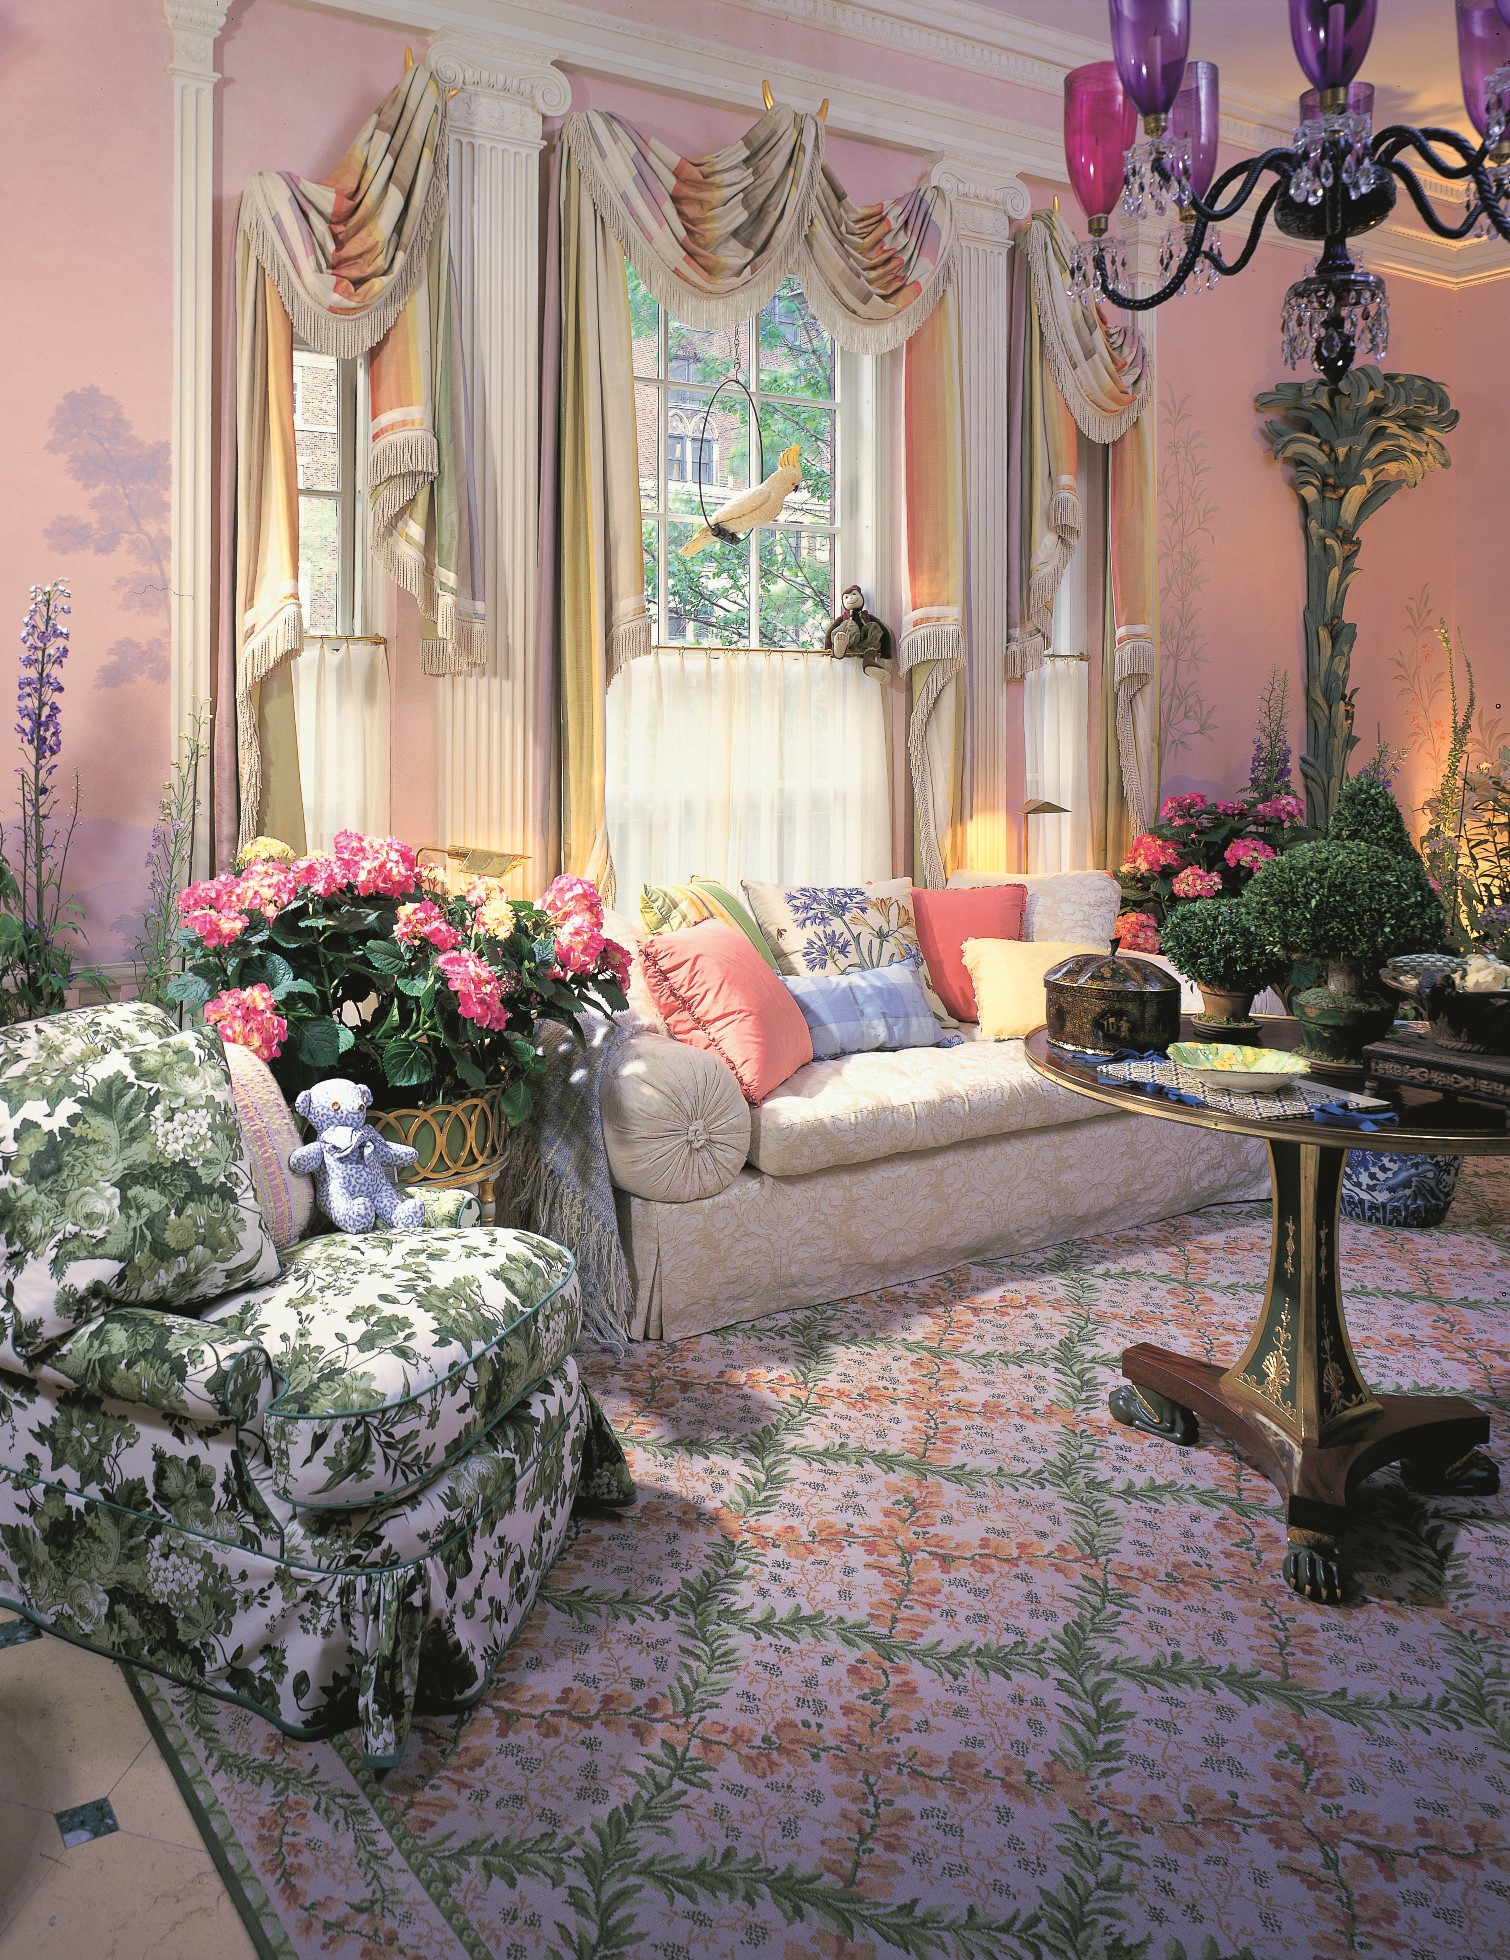 Kips Bay Decorator Show House’s Most Memorable Interiors | Incollect